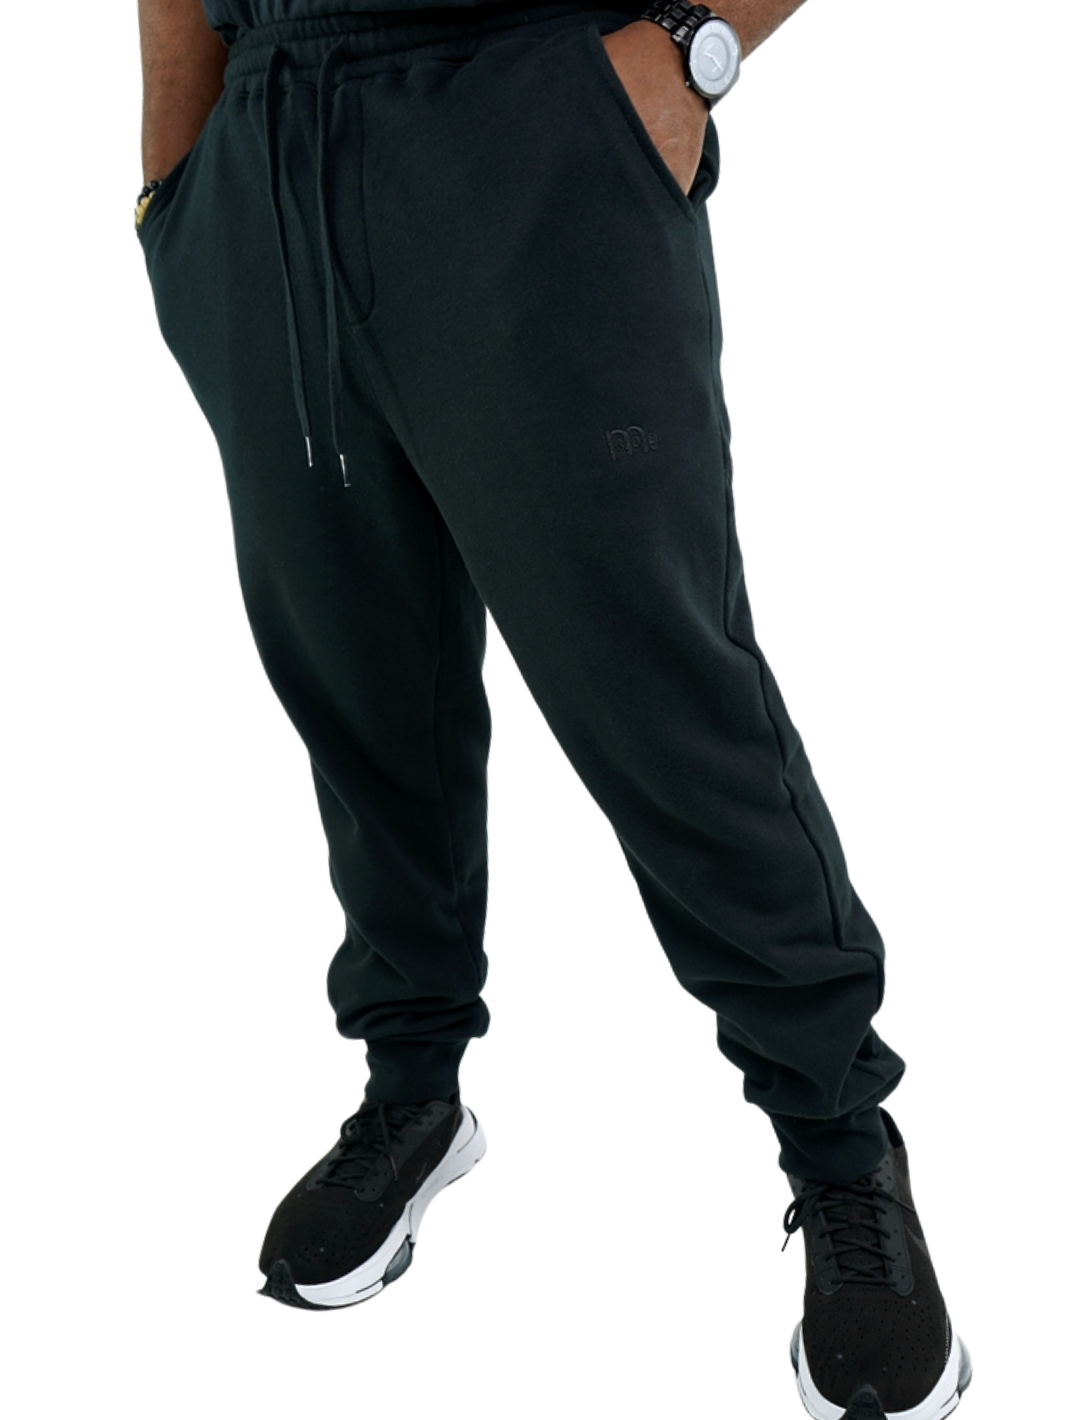 Experience the ultimate comfort in Men's joggers with GODinme! Made with premium quality fabric, these Black GODinme sweat pants offer an elastic waistband for that perfectly relaxed fit. Featuring ribbing ankle cuffs, sewn eyelets, and the signature GODinme logo (in Black) at left leg.